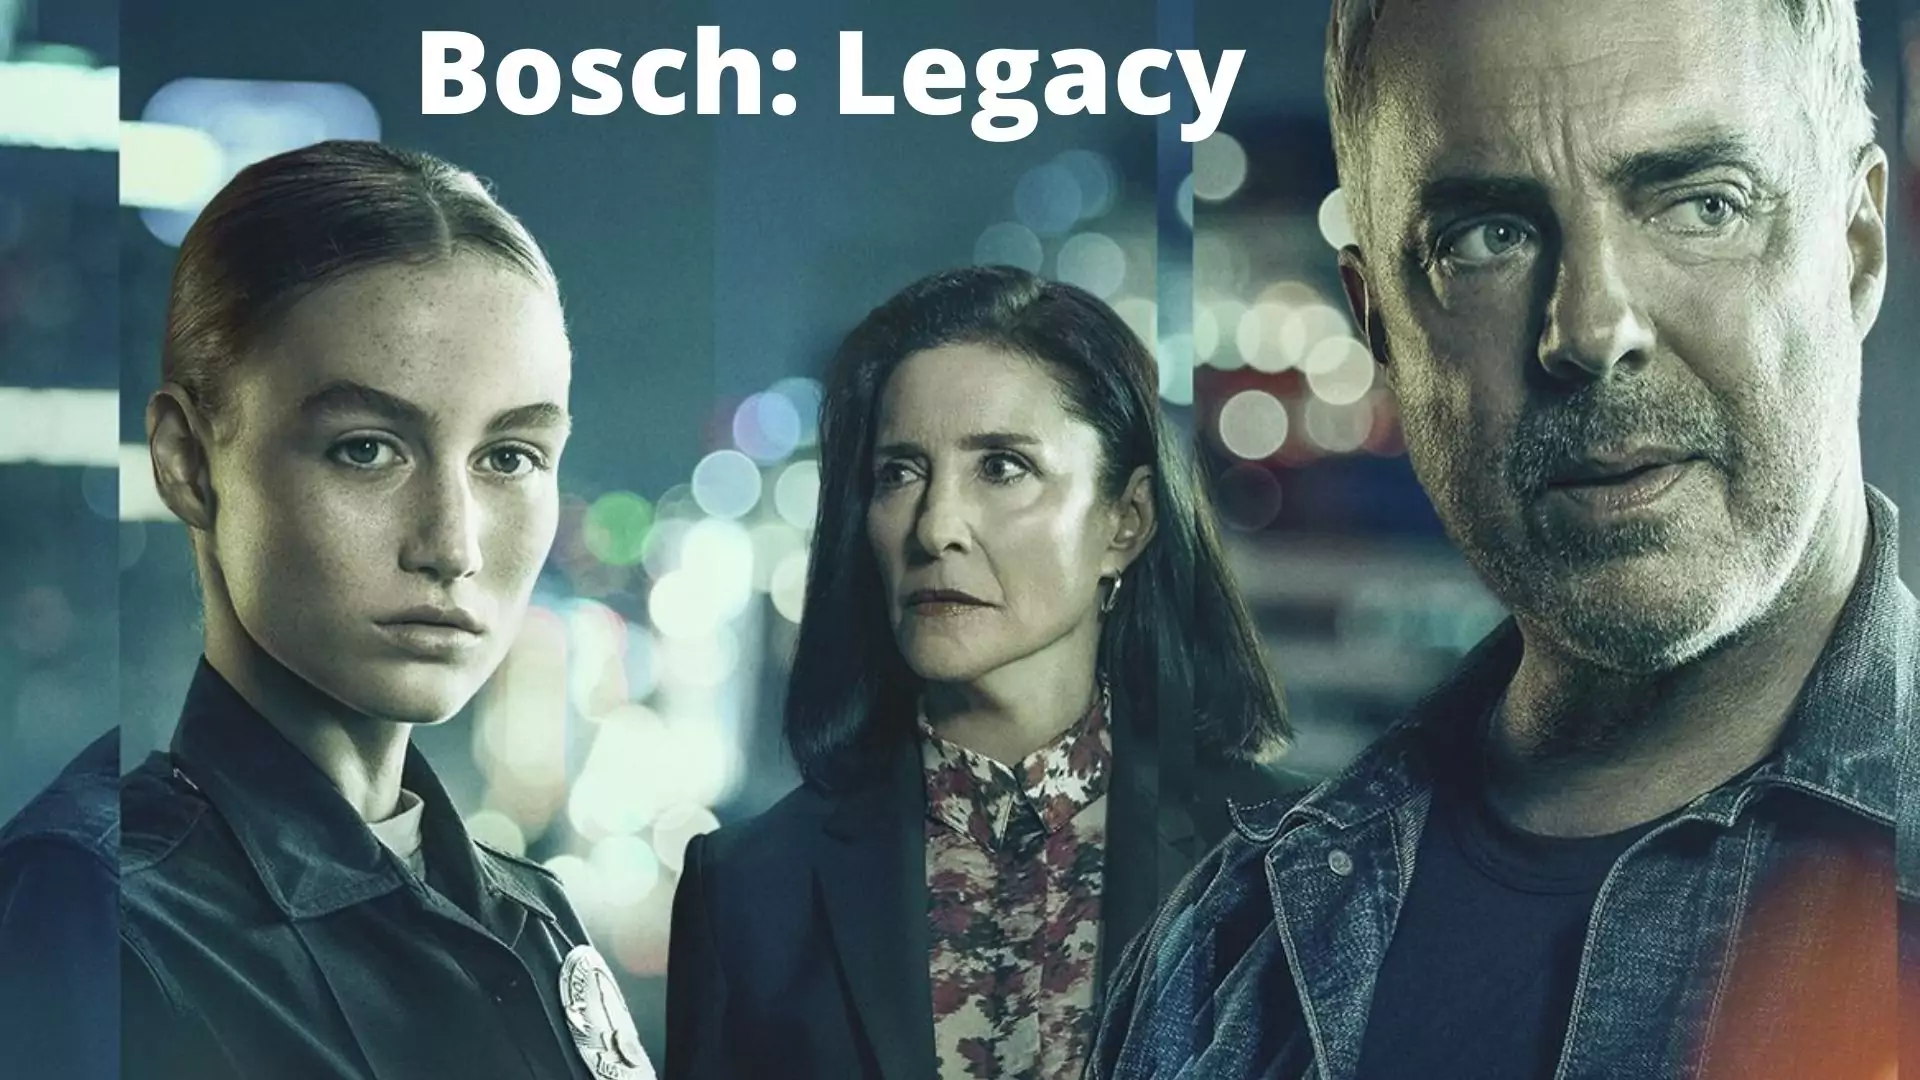 Bosch: Legacy Parents Guide and Age Rating | 2022